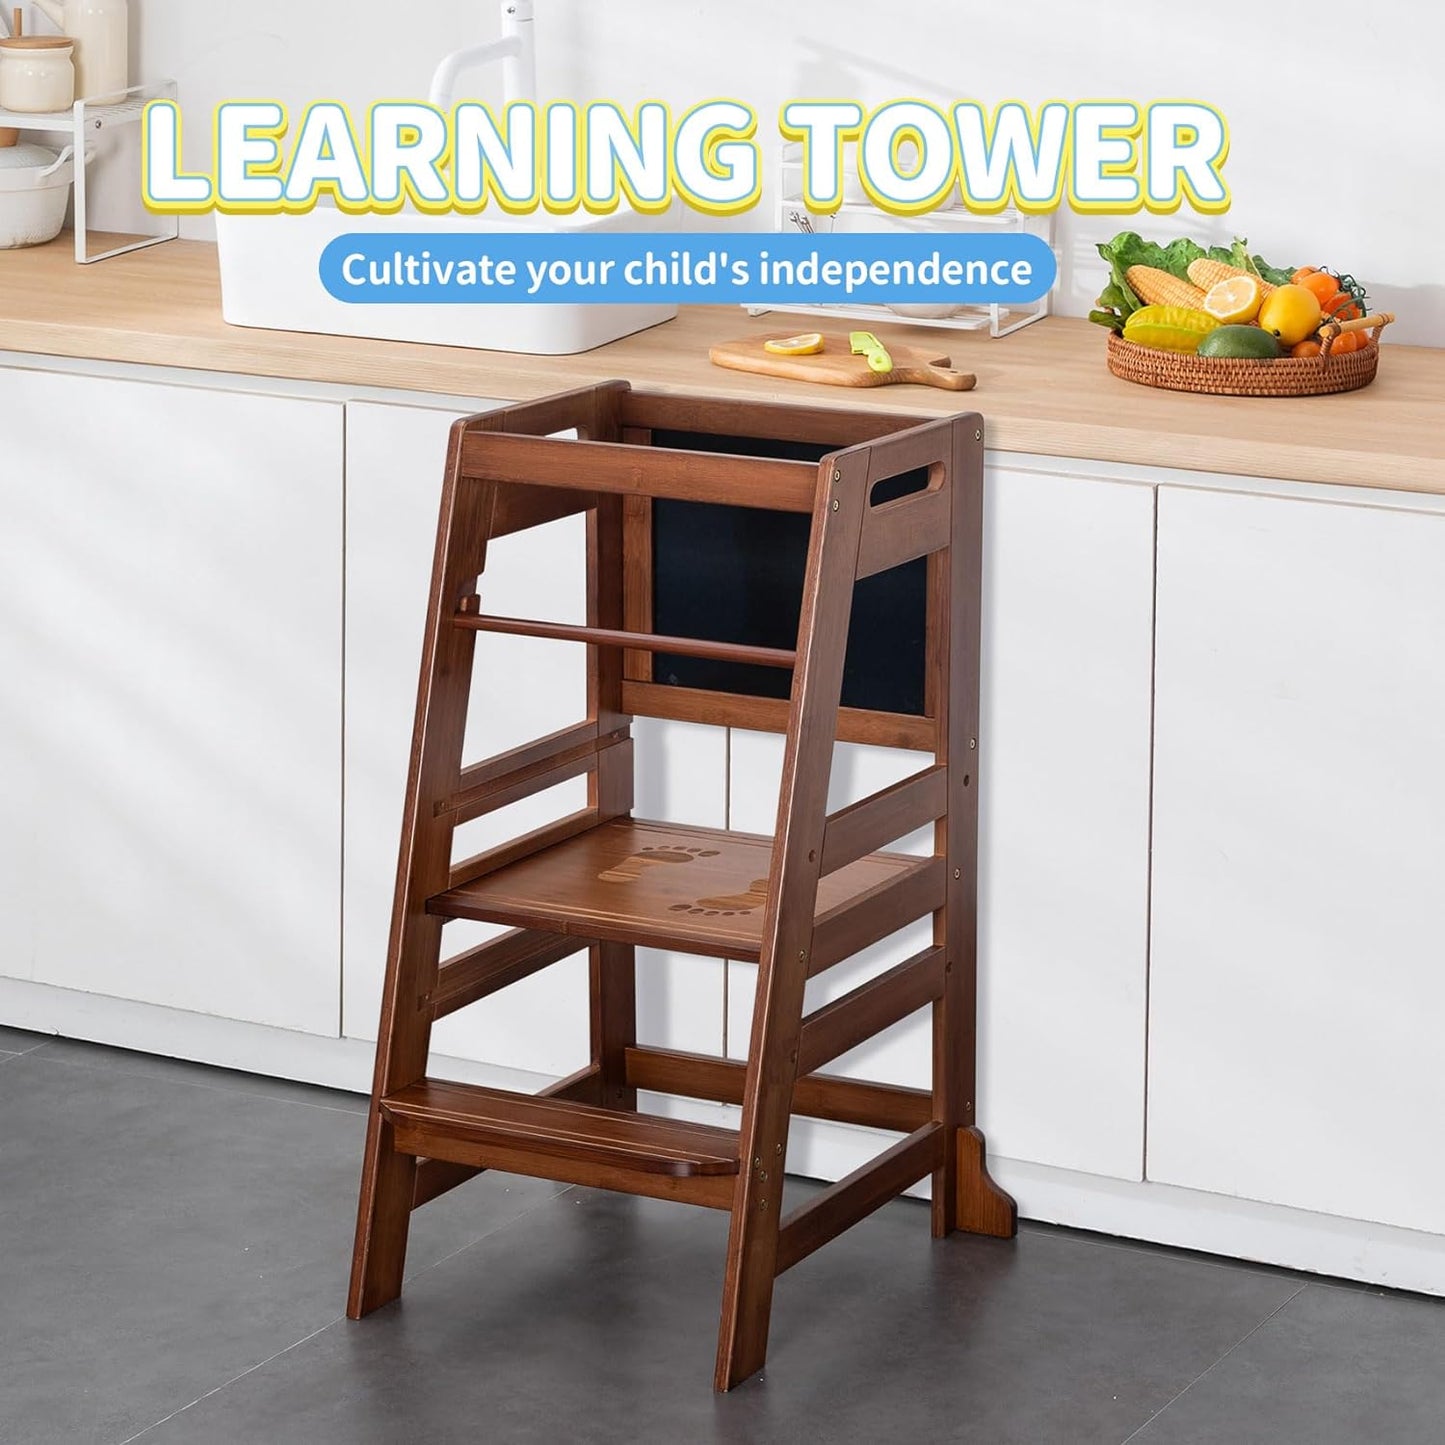 UNICOO Bamboo Adjustable Height Kids Kitchen Step Stool, Toddler Learning Tower & Helper Stool for Bathroom, Kitchen Counter - Designed for Toddler's Growth and Independence (P042)